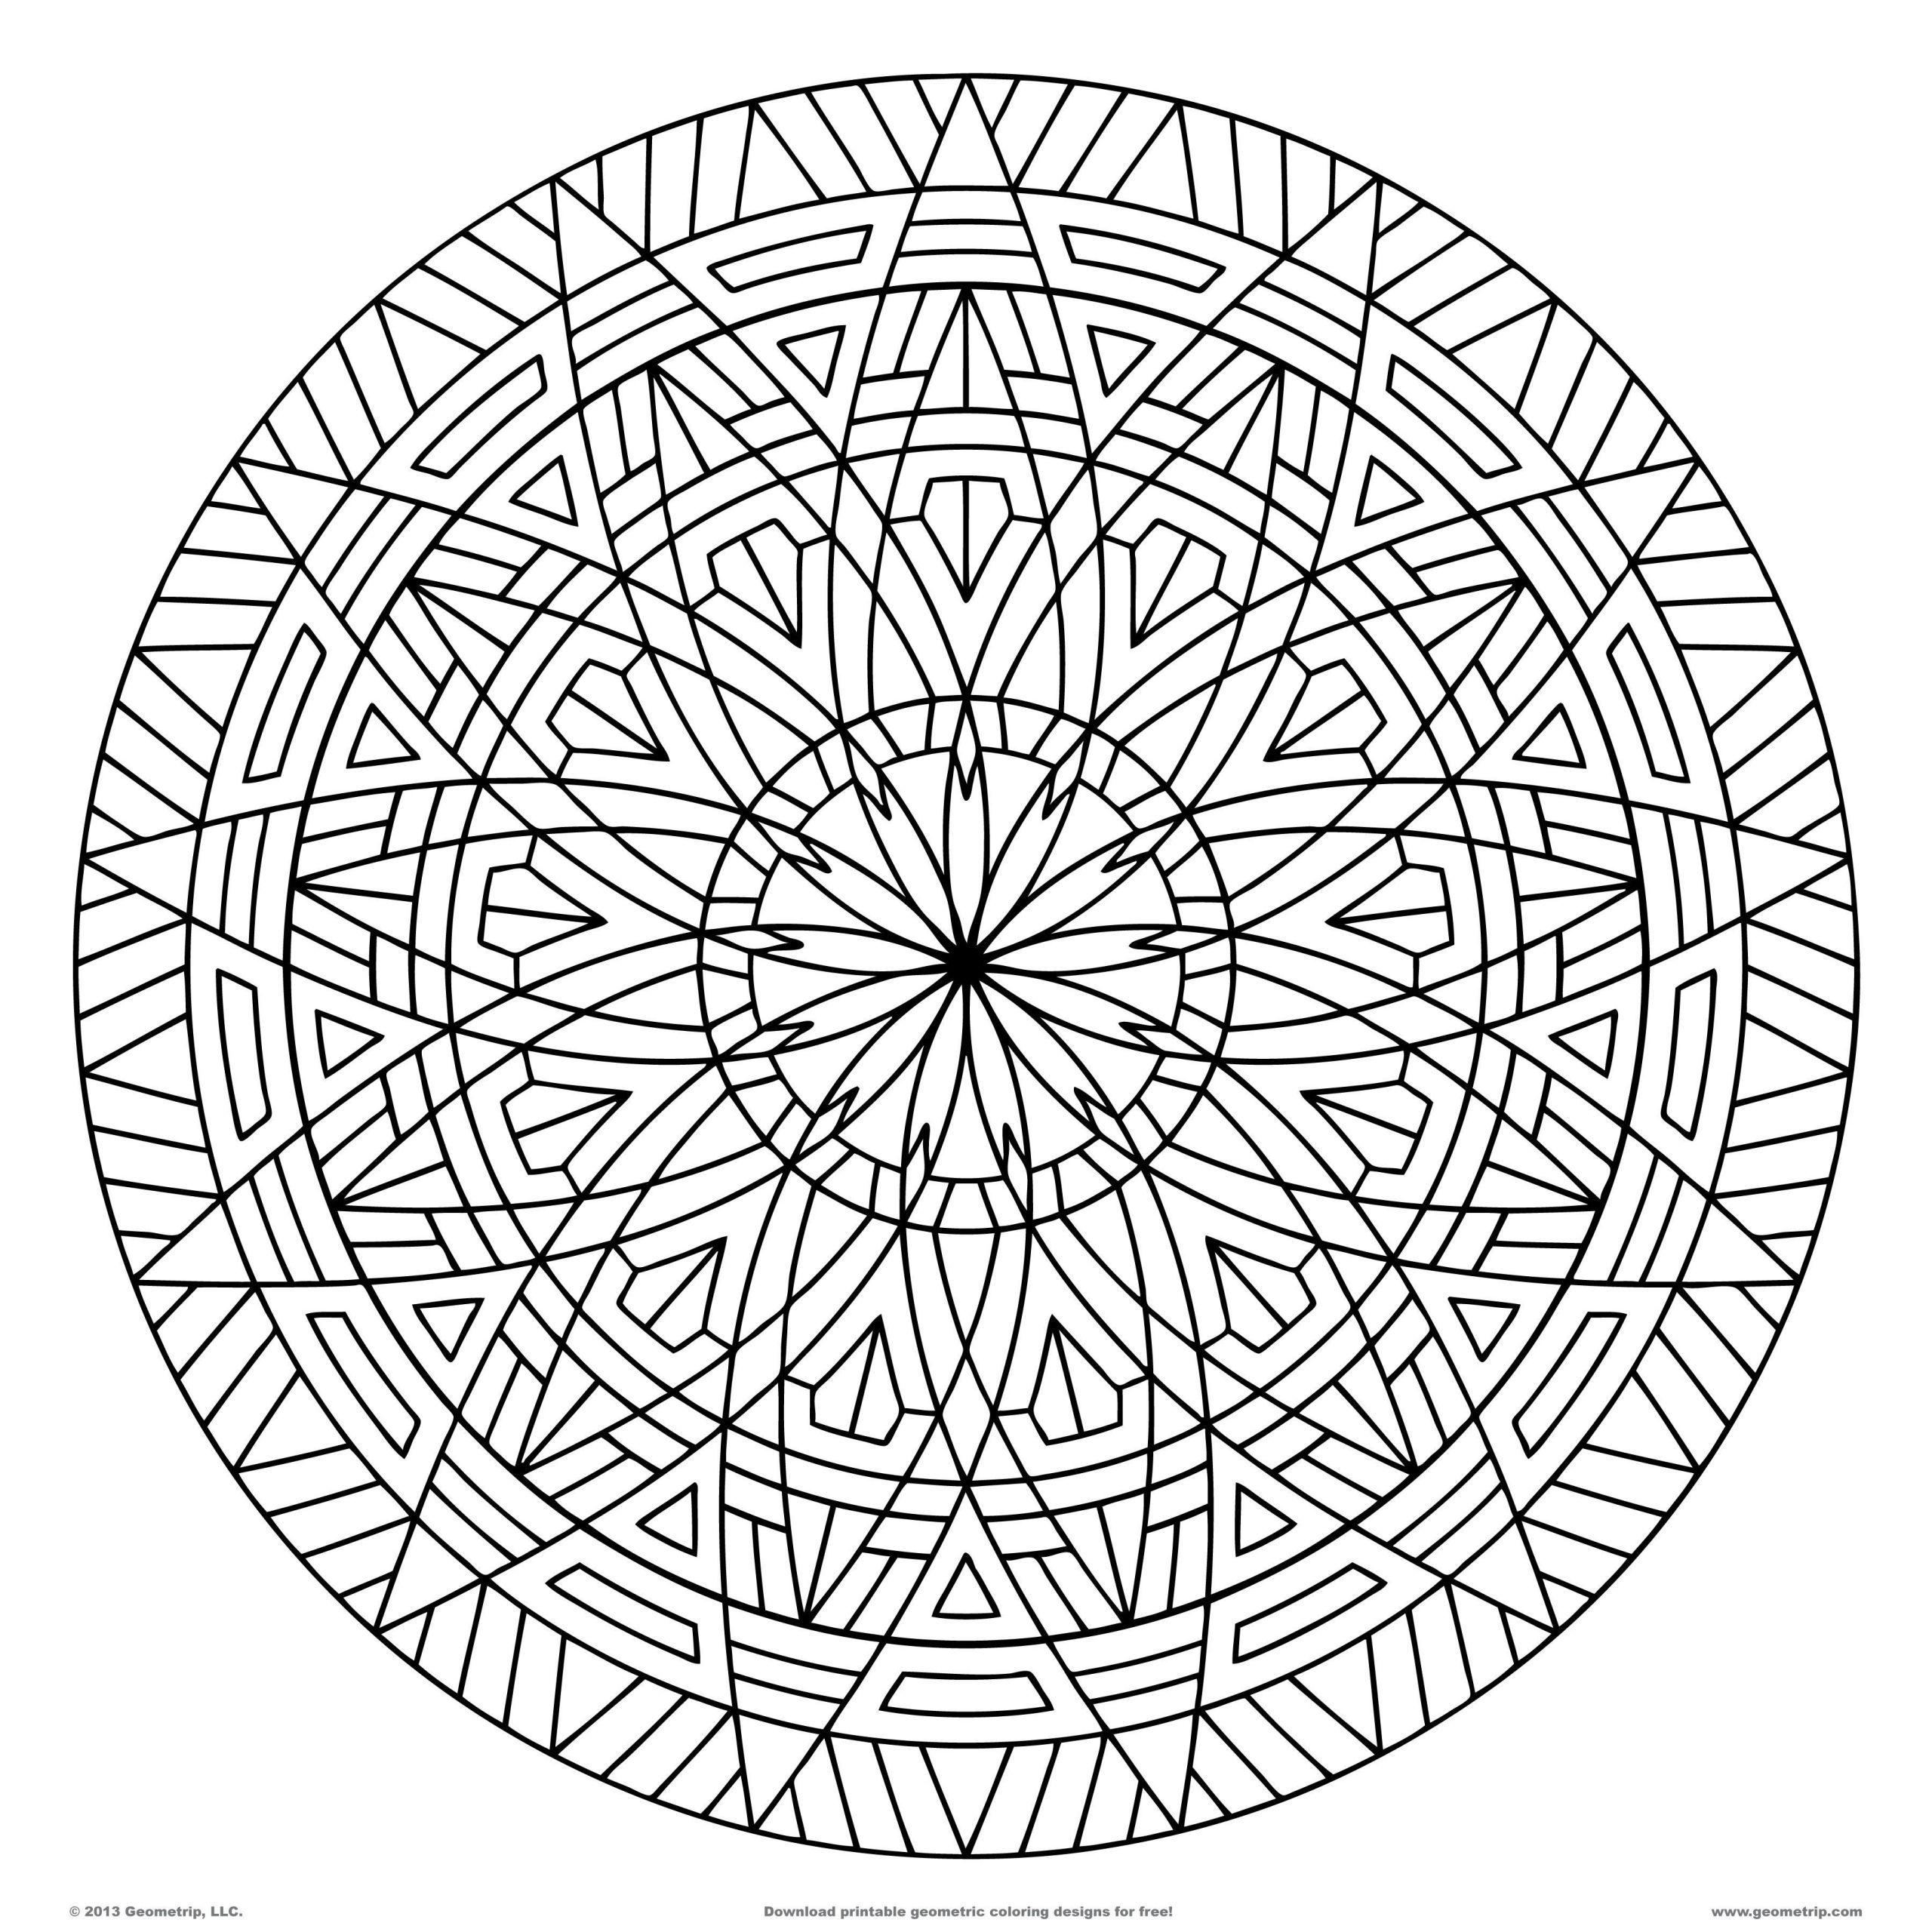 Coloring Pages For Adults Patterns
 Pattern Coloring Pages For Adults Coloring Home